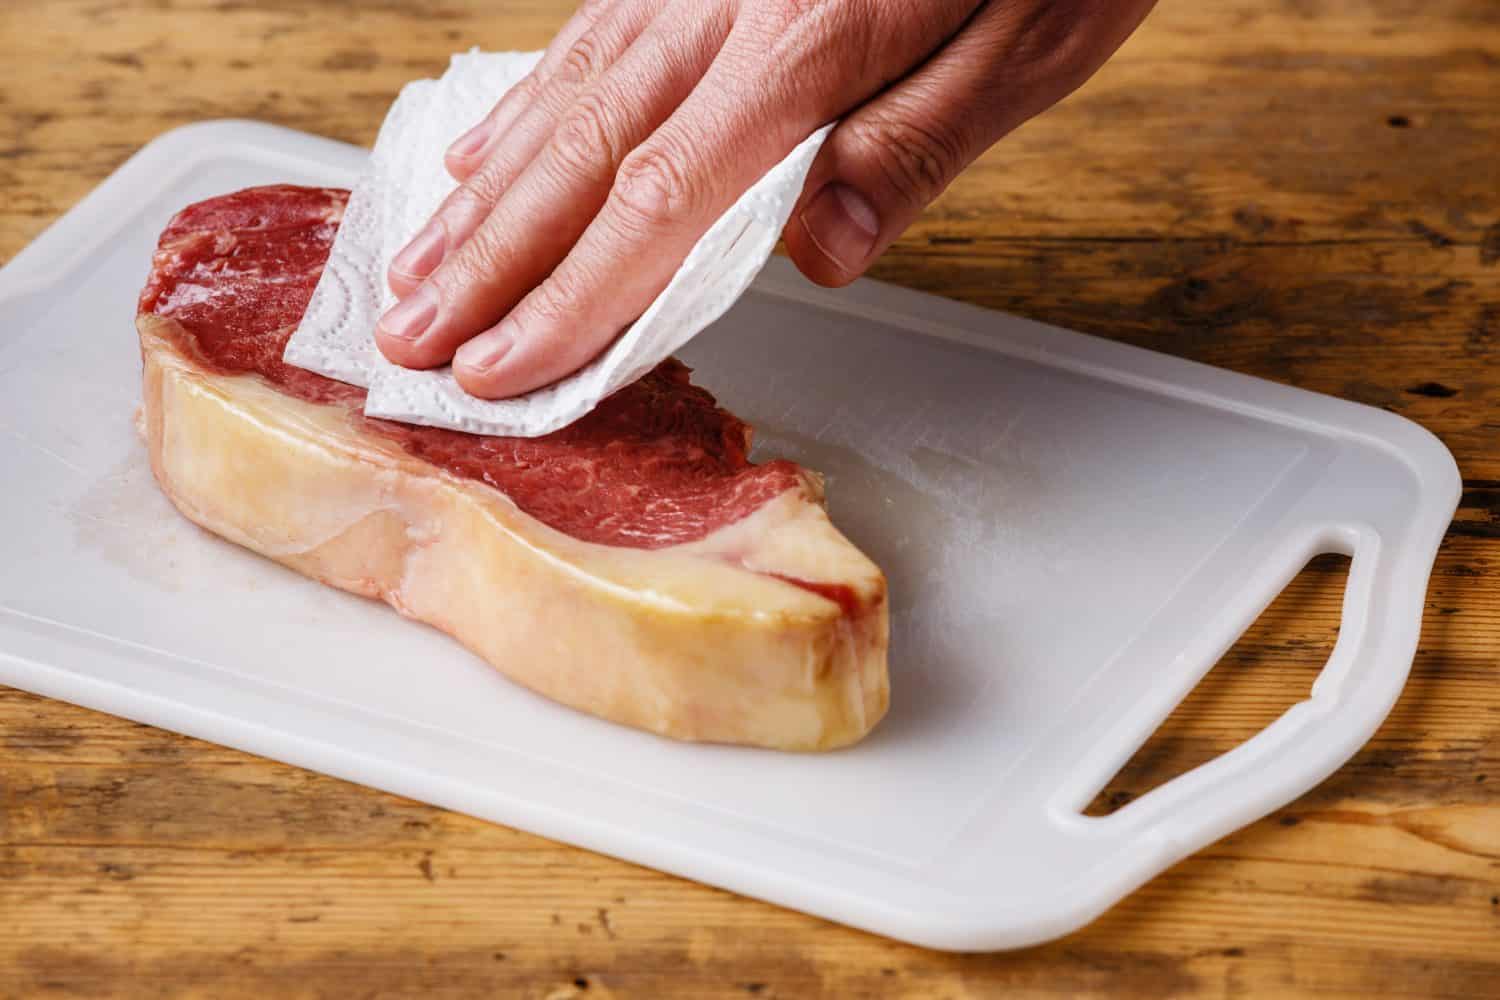 Raw fresh meat Steak Striploin on cutting board drying up excess moisture by Male hand with paper towel